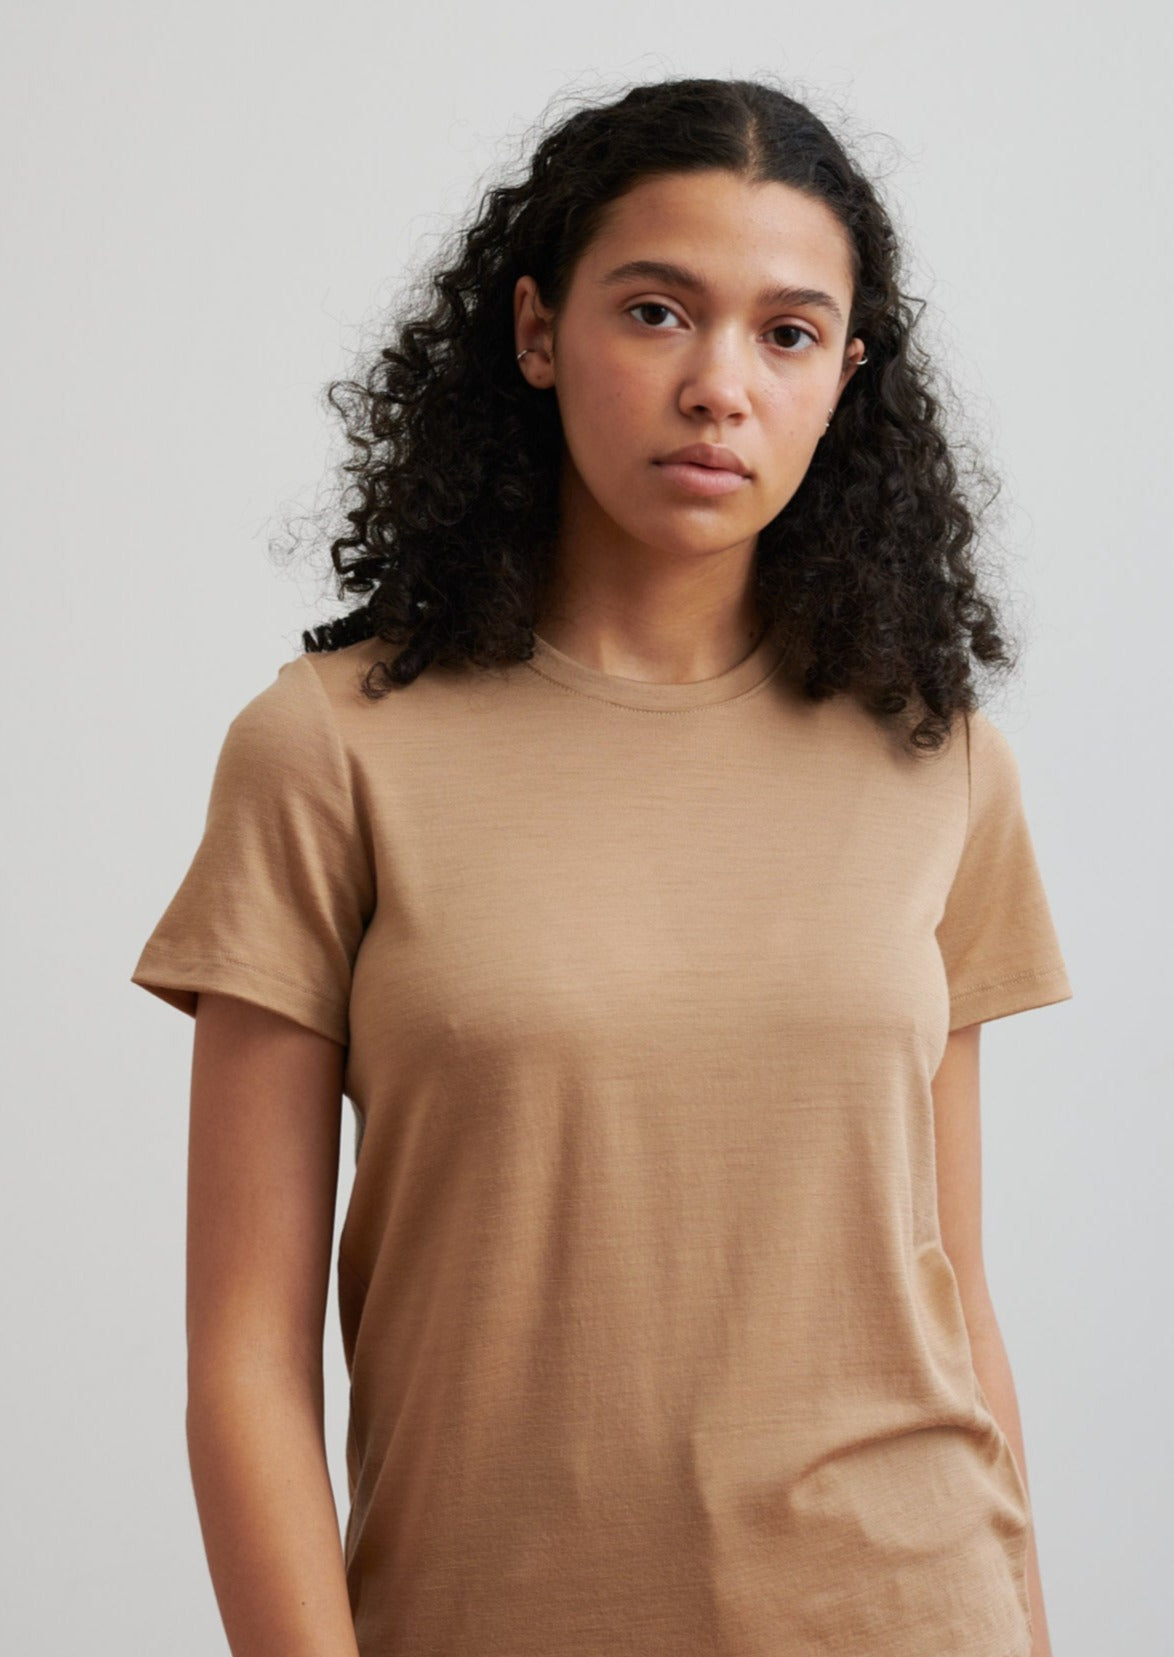 A wardrobe essential, this classic t-shirt in ethical wool is soft and lightweight and designed to wear all seasons.